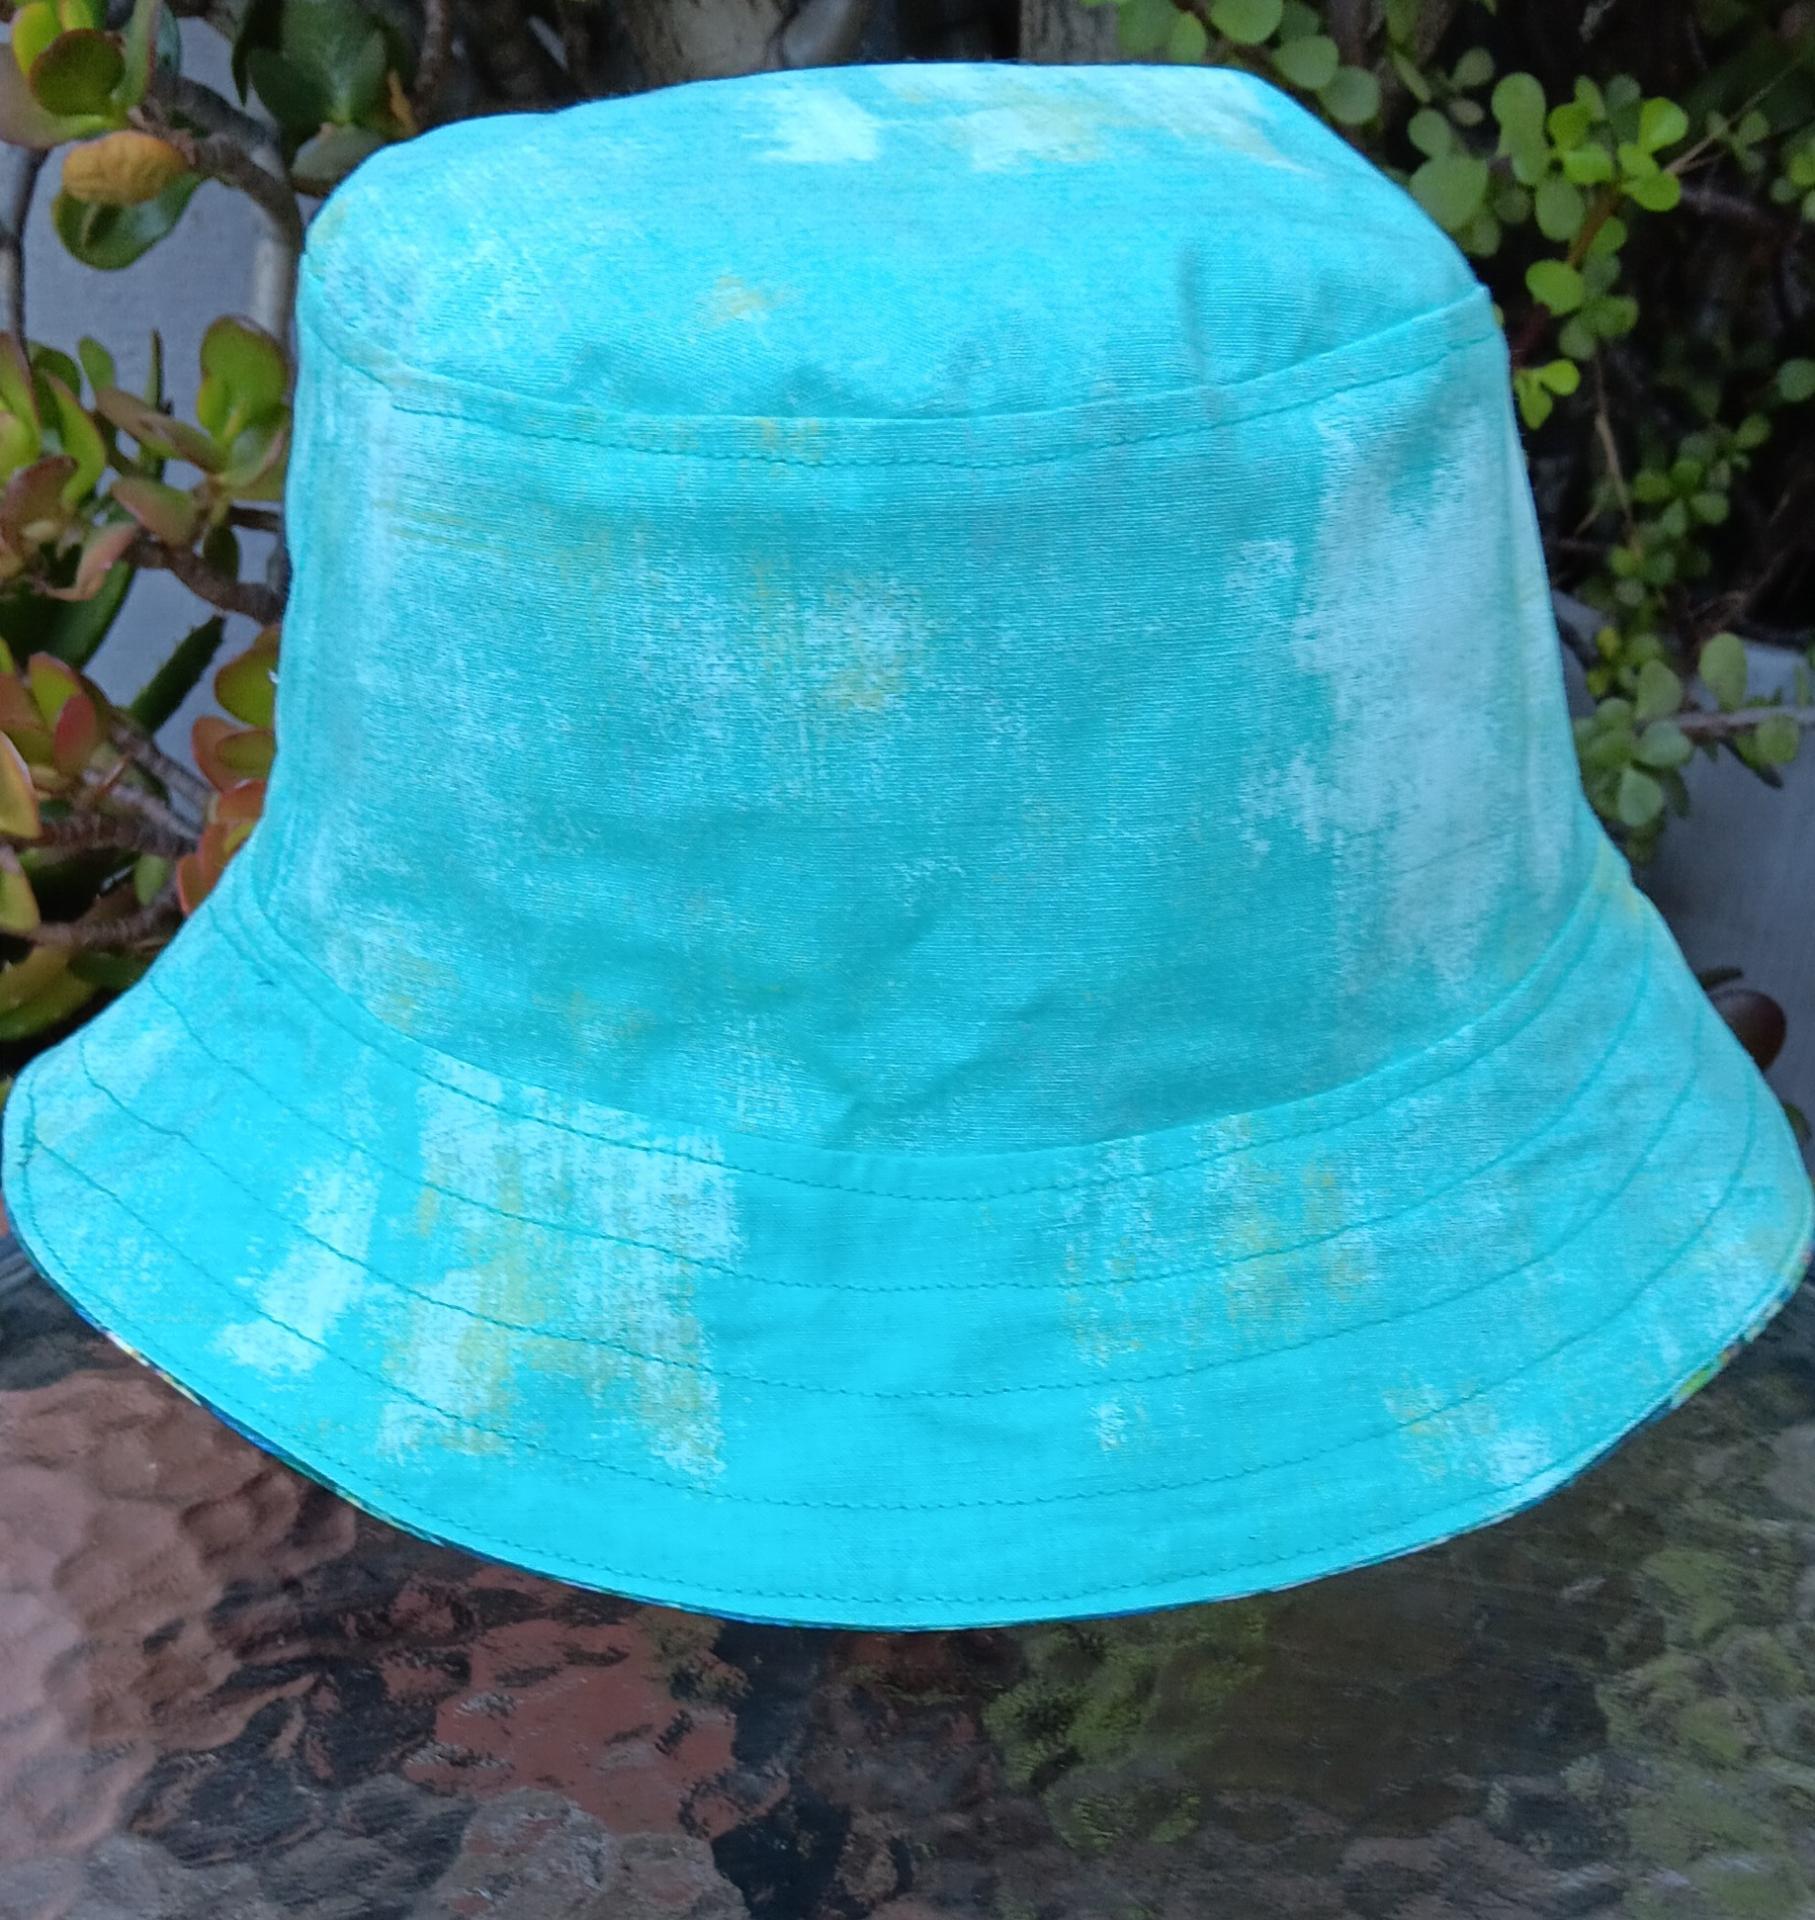 Monet Water Lilies Bucket Hat, Reversible, Size Medium, hat for beach, vacation, gardening, boating, fishing, travel